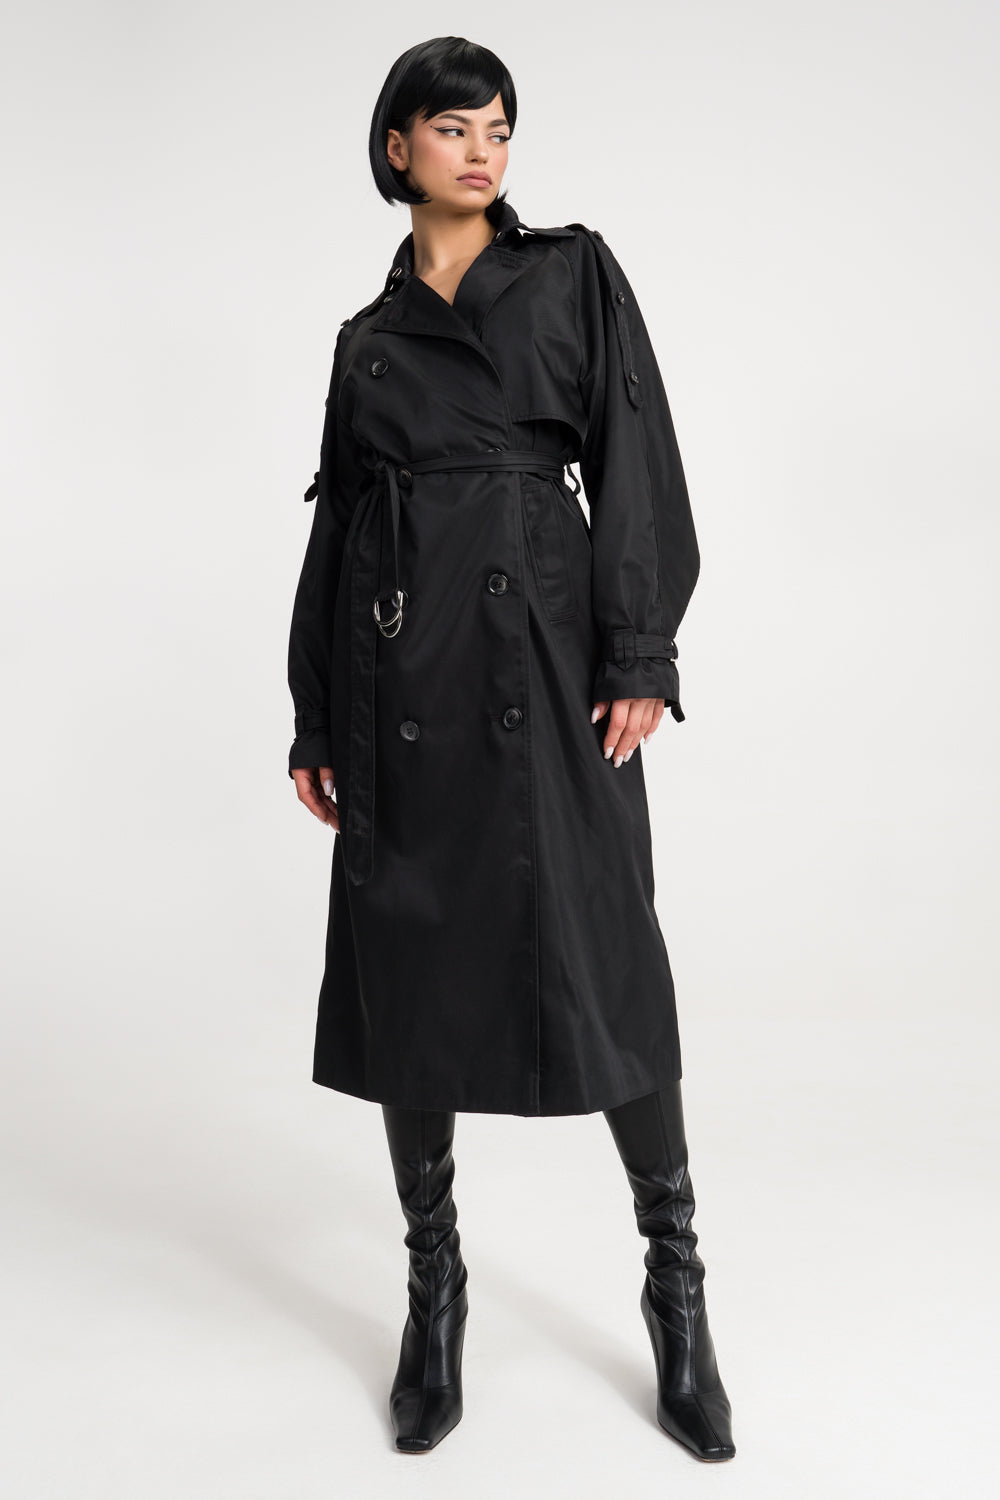 ‘Constance‘ DETACHABLE FLOWER DOUBLE-BREASTED TRENCH COAT